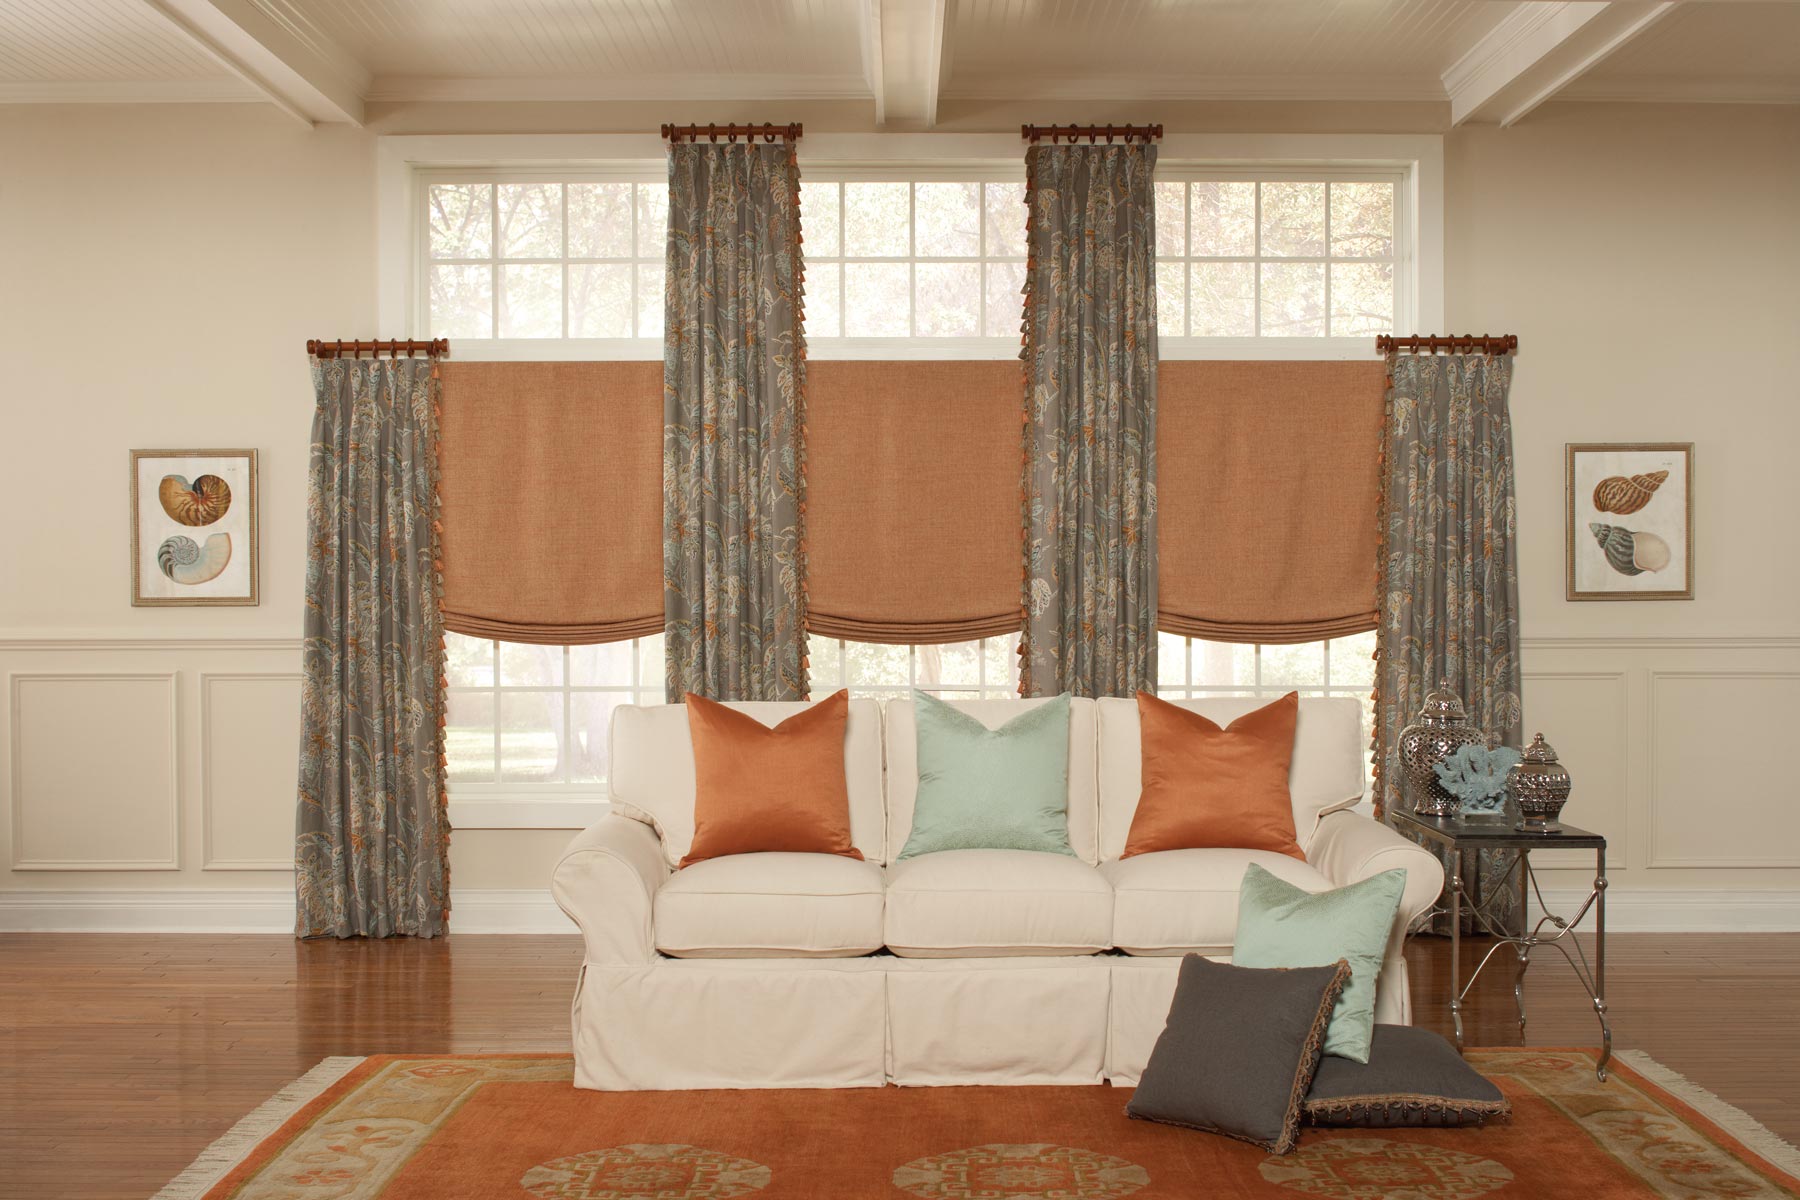 Interior Masterpieces® Draperies with Embellishment Trim and Custom Drapery Hardware and Casual Fabric Shades